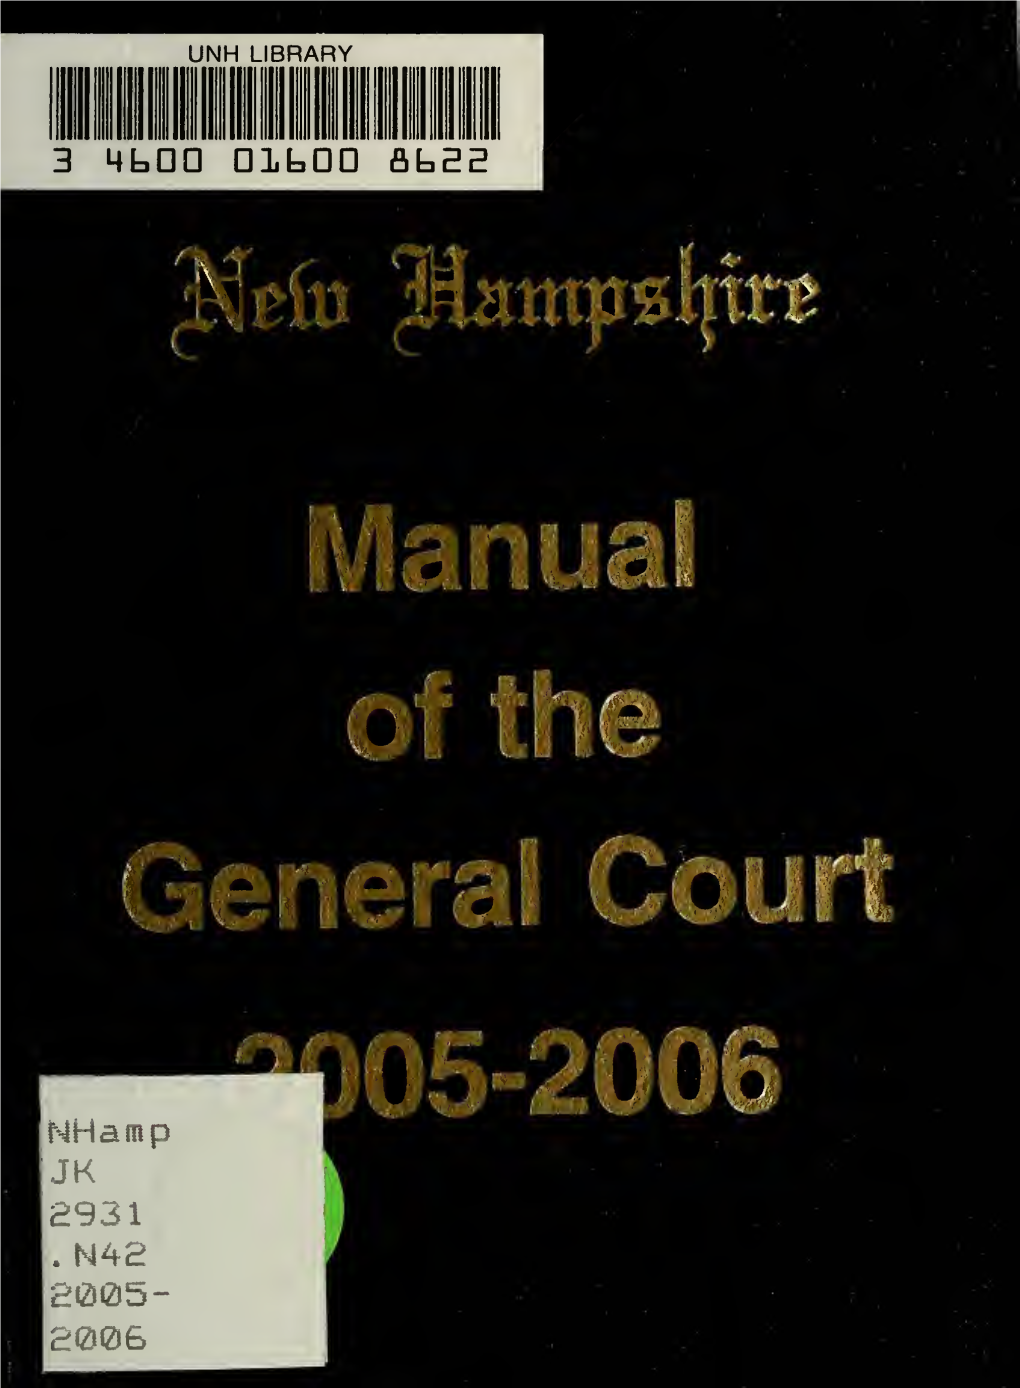 Manual of the New Hampshire General Court, 2005